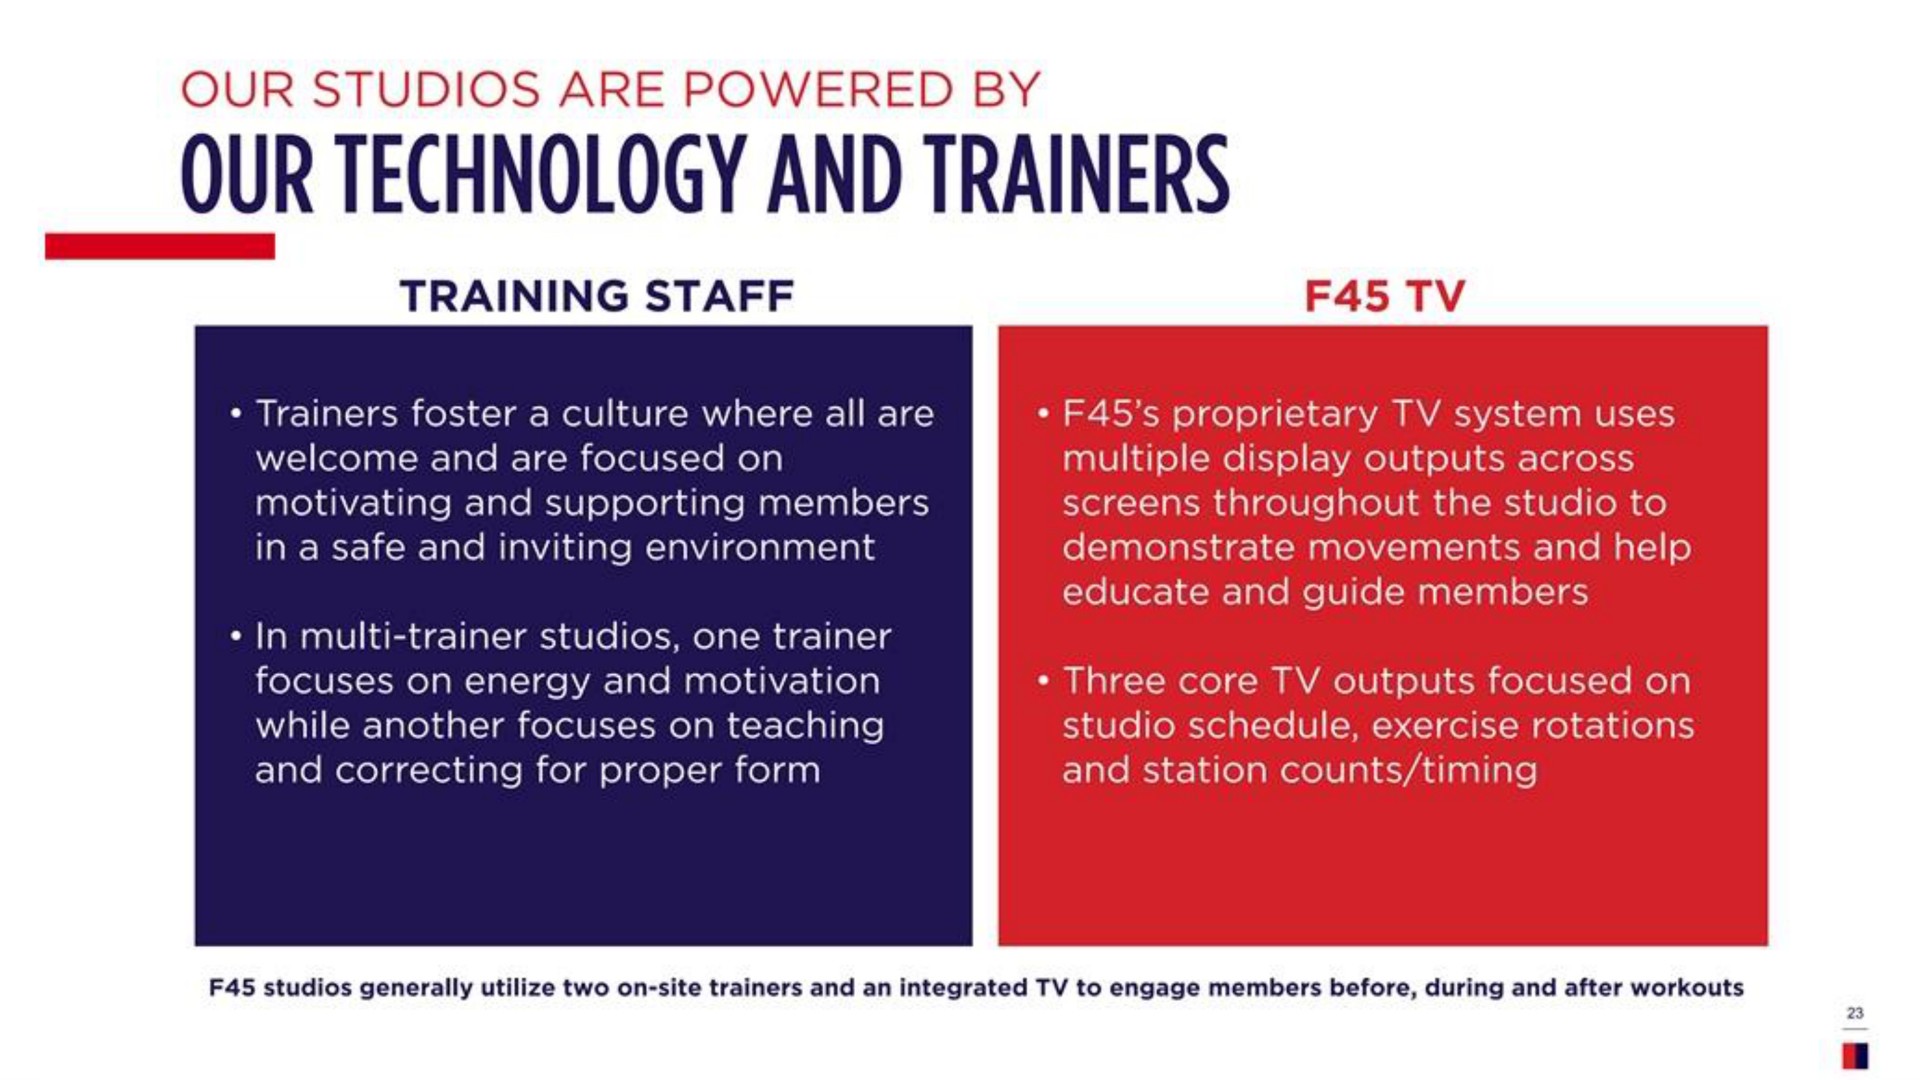 our technology and trainers | F45